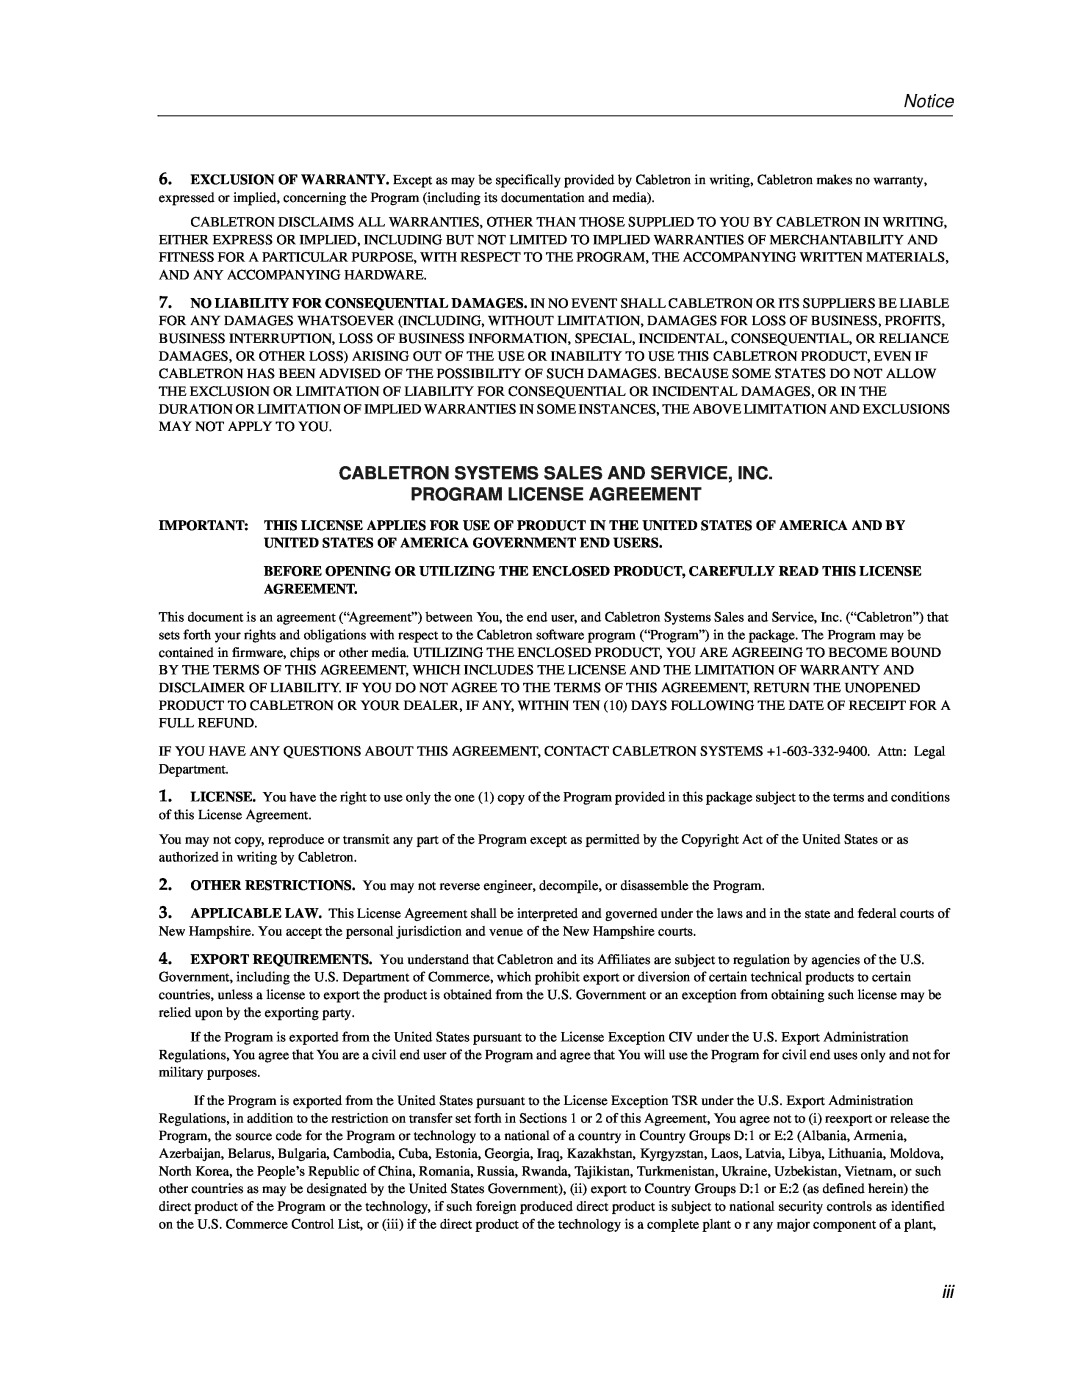 Cabletron Systems 9F125-0, 9F120-08, 9F122-12 manual Cabletron Systems Sales And Service, Inc Program License Agreement 